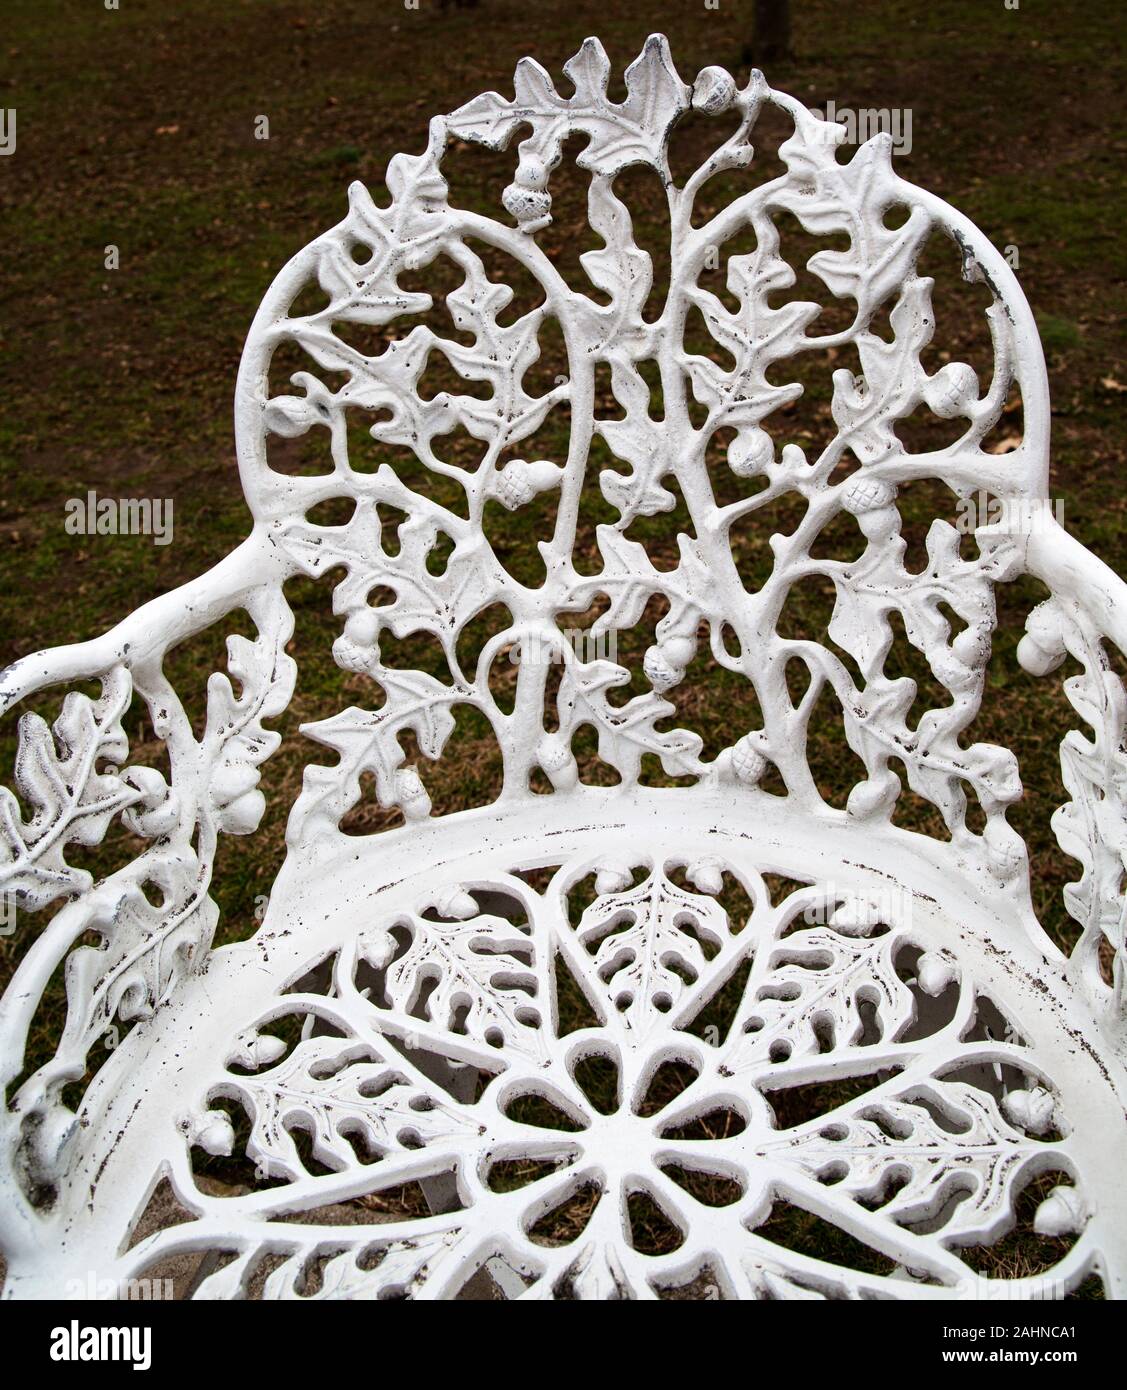 White painted Cast Iron Chairs, grapevine, Liberty Island, New York Harbour, New York, USA Stock Photo